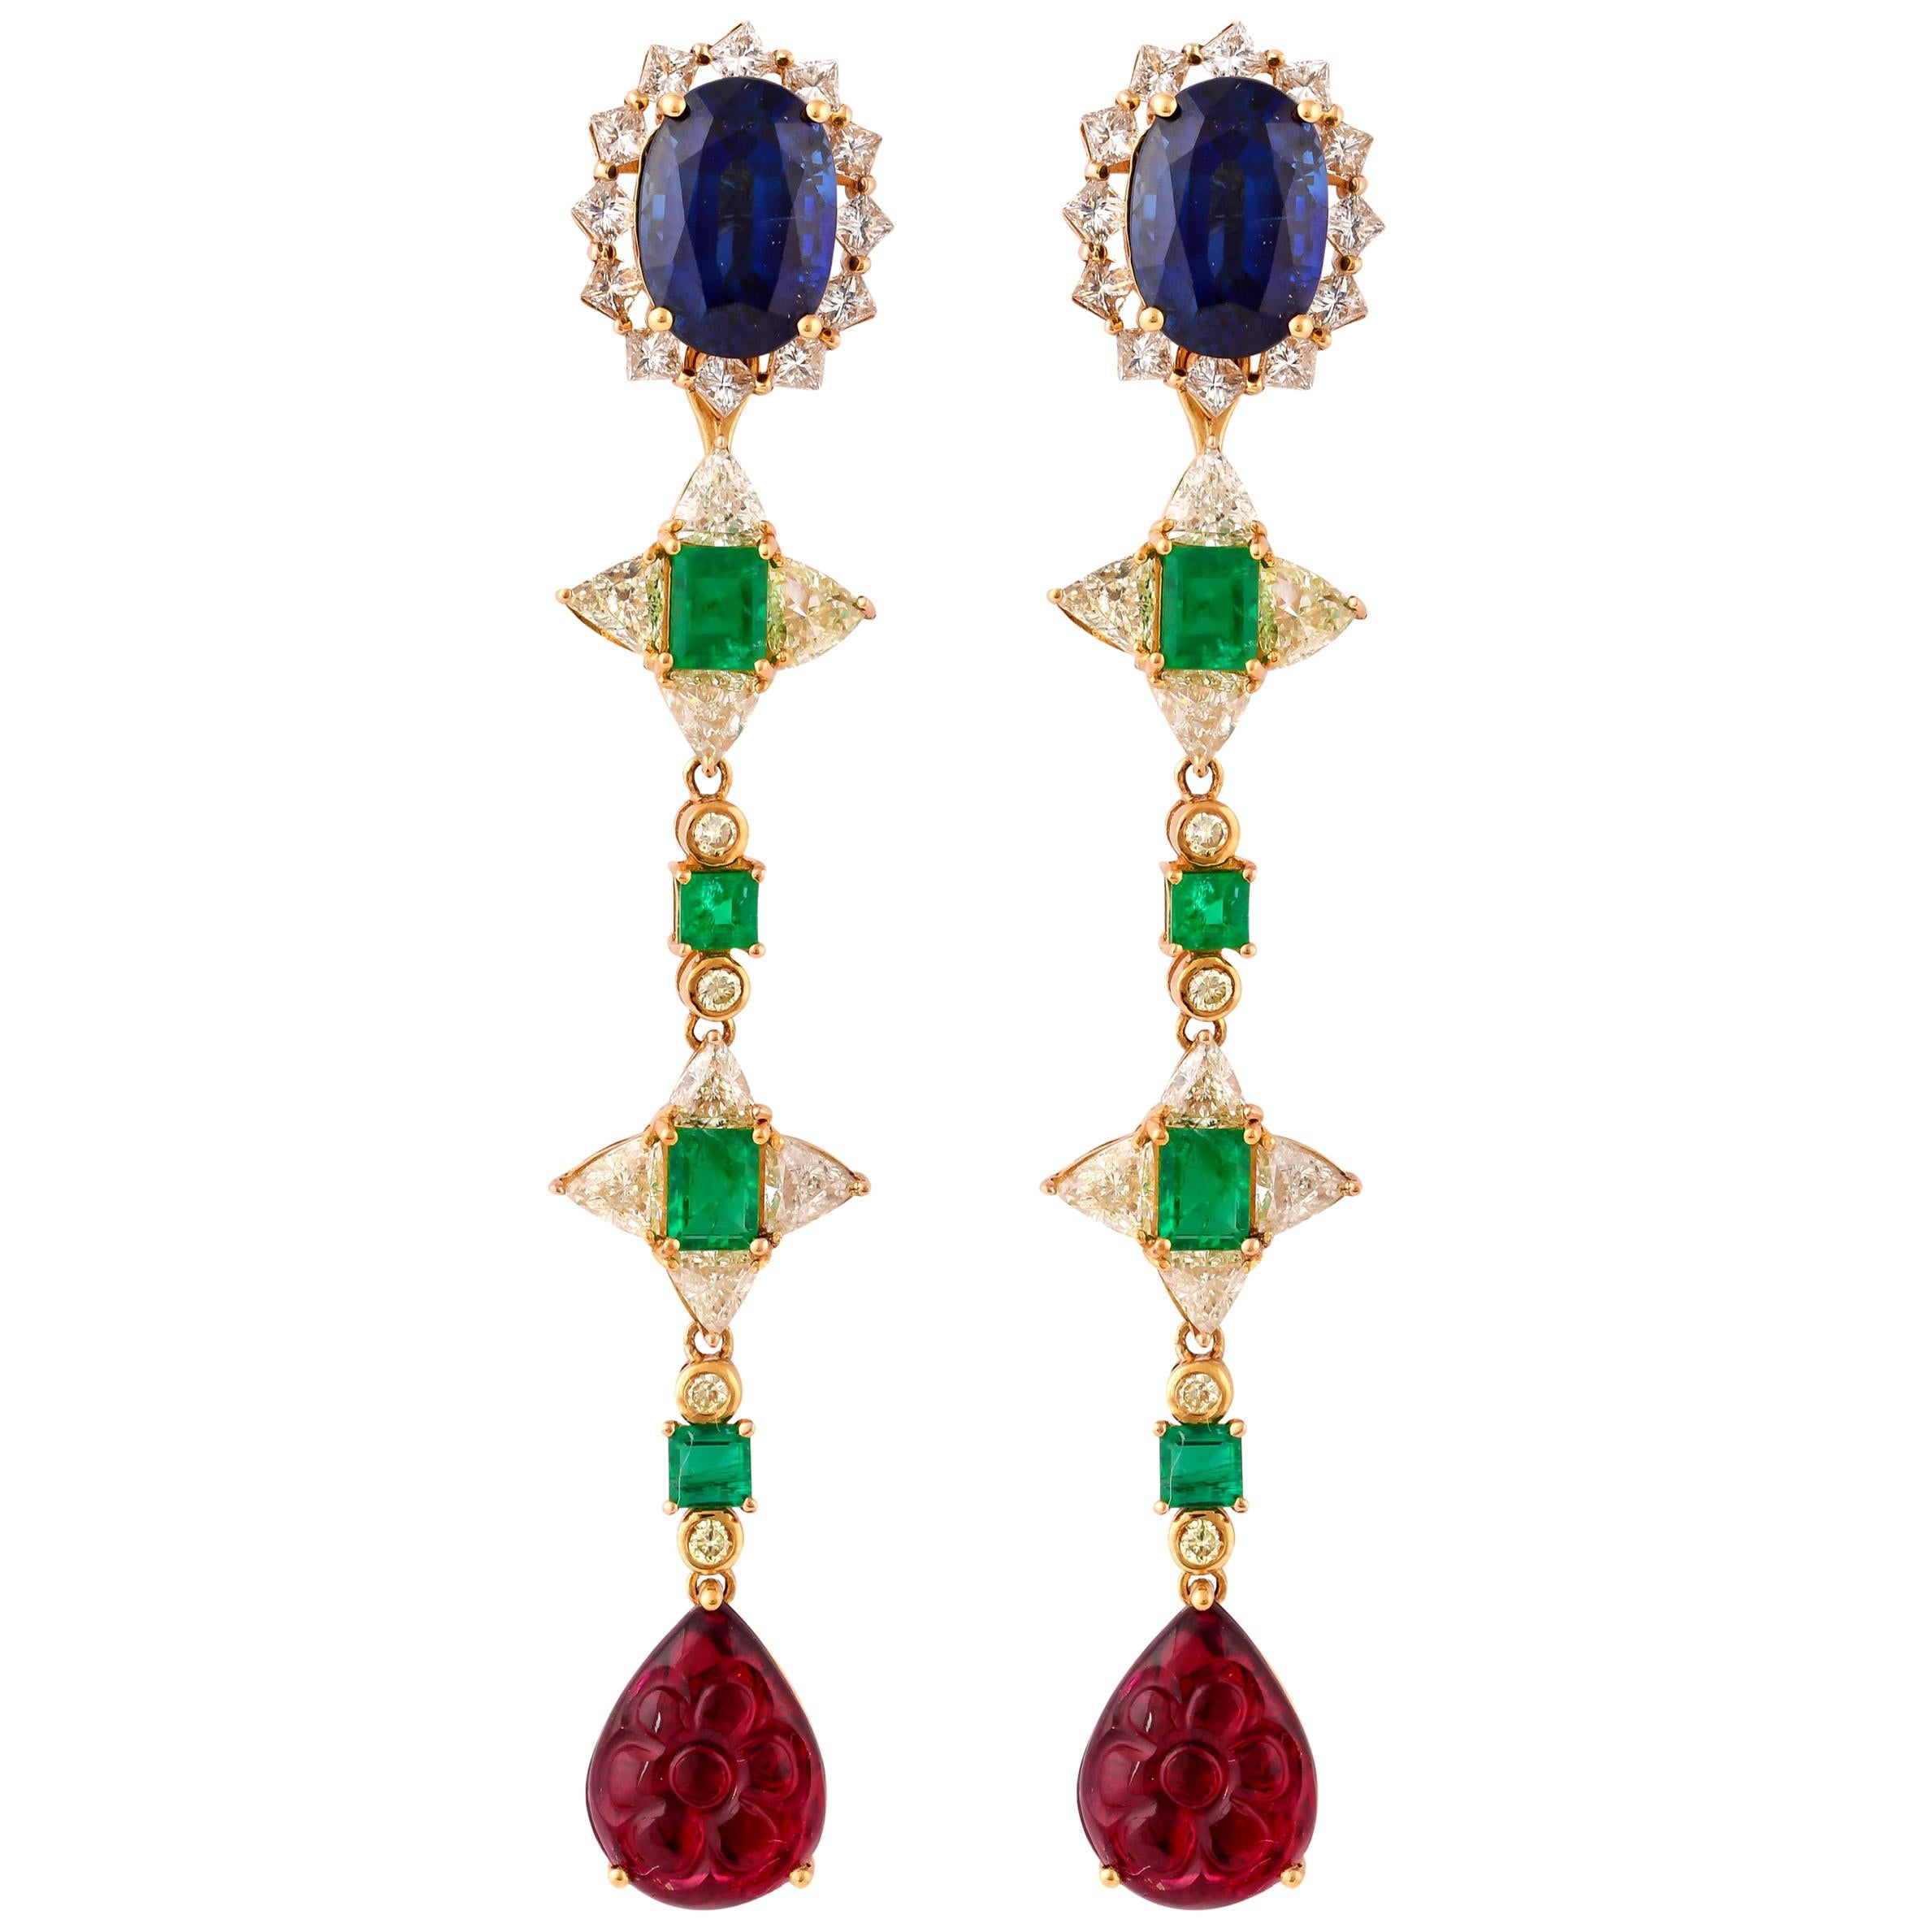 Emerald, Blue Sapphire and Rubelite Earring in 18 Karat Gold with Diamonds